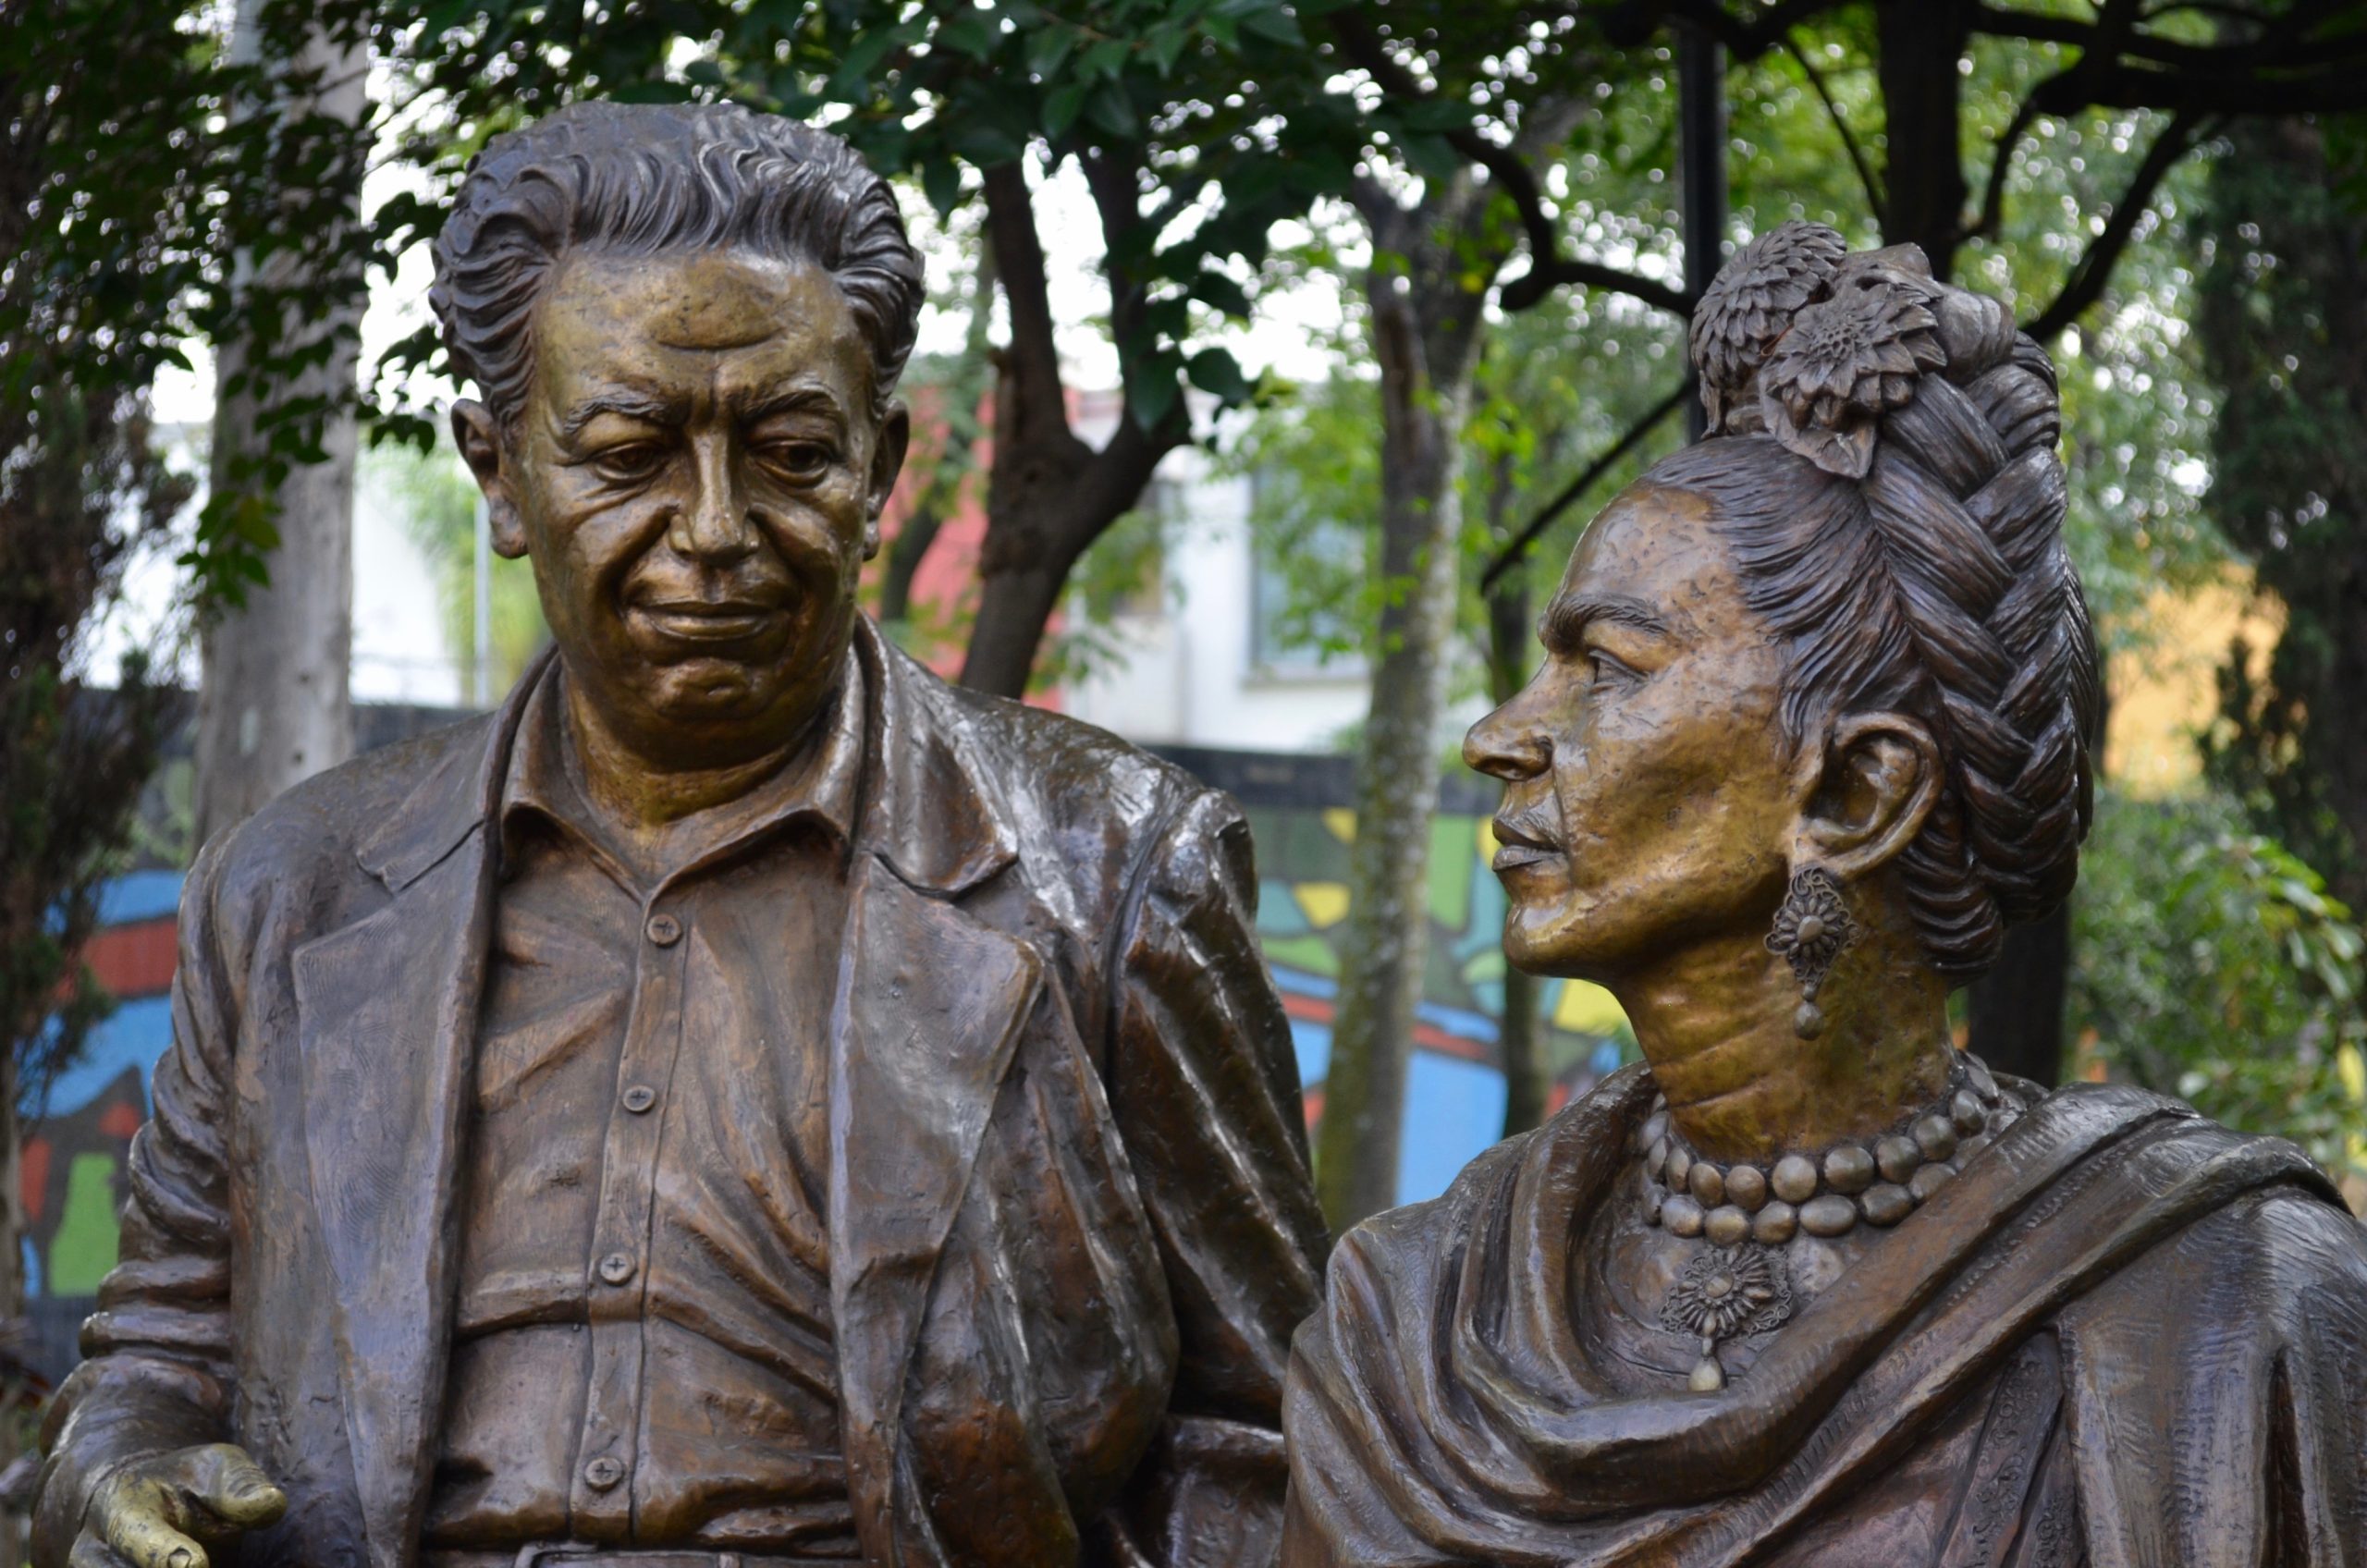 Frida Kahlo and Diego Rivera are two Mexican icons. The Frida Kahlo Park is located in Coyoacán, in the Concepción neighborhood. They both lived in Coyoacán for many years, and you can still visit their house, which has been turned into a museum.